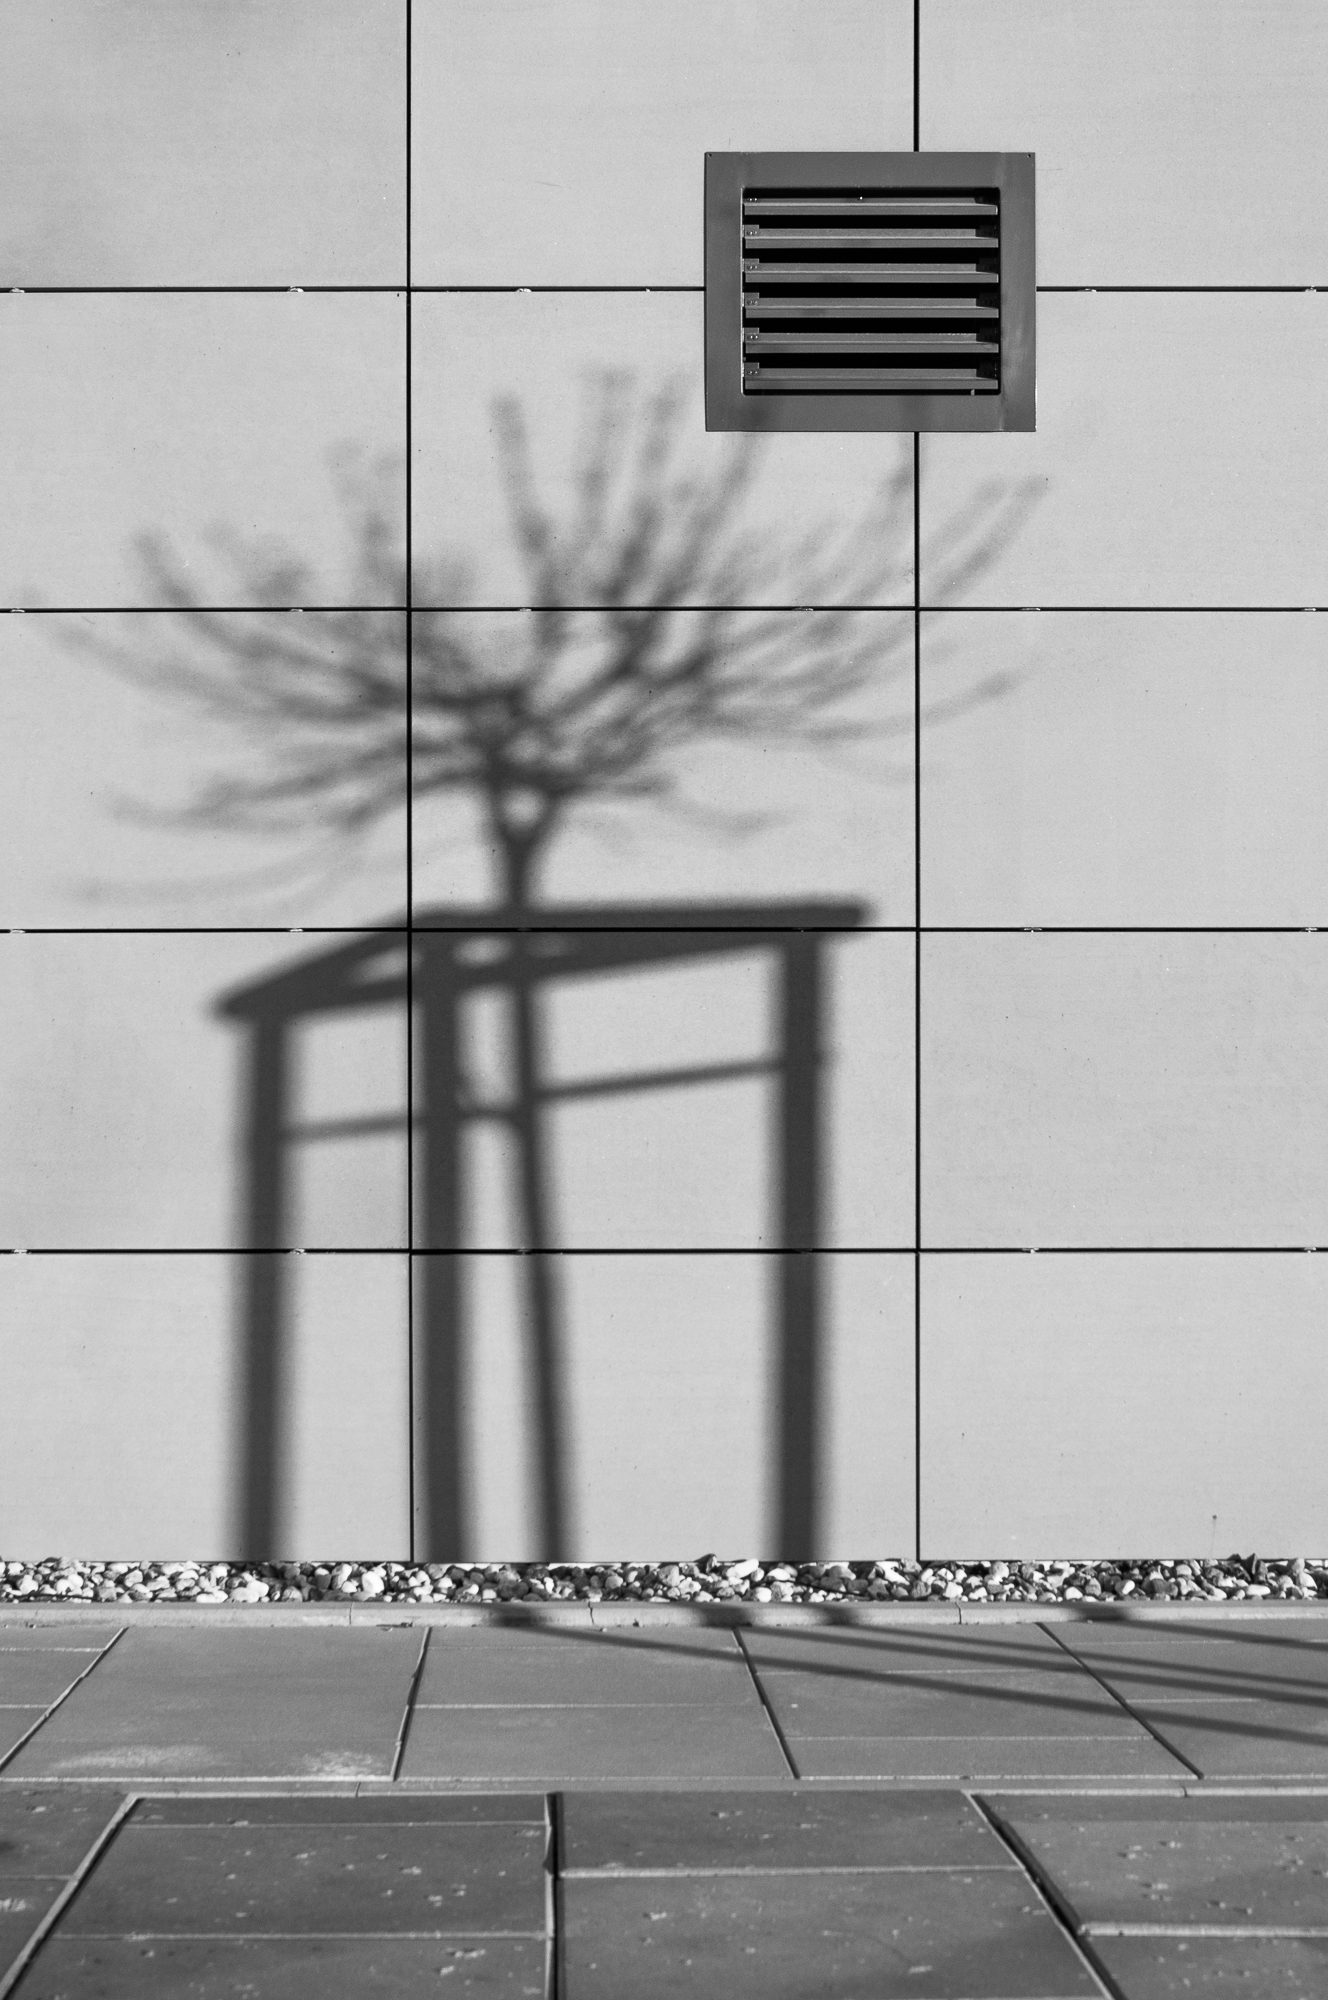 Adam Mazek Photography 2022. Warsaw Street Photography. Post: "I do not have to write. I want to do it." Minimalism.